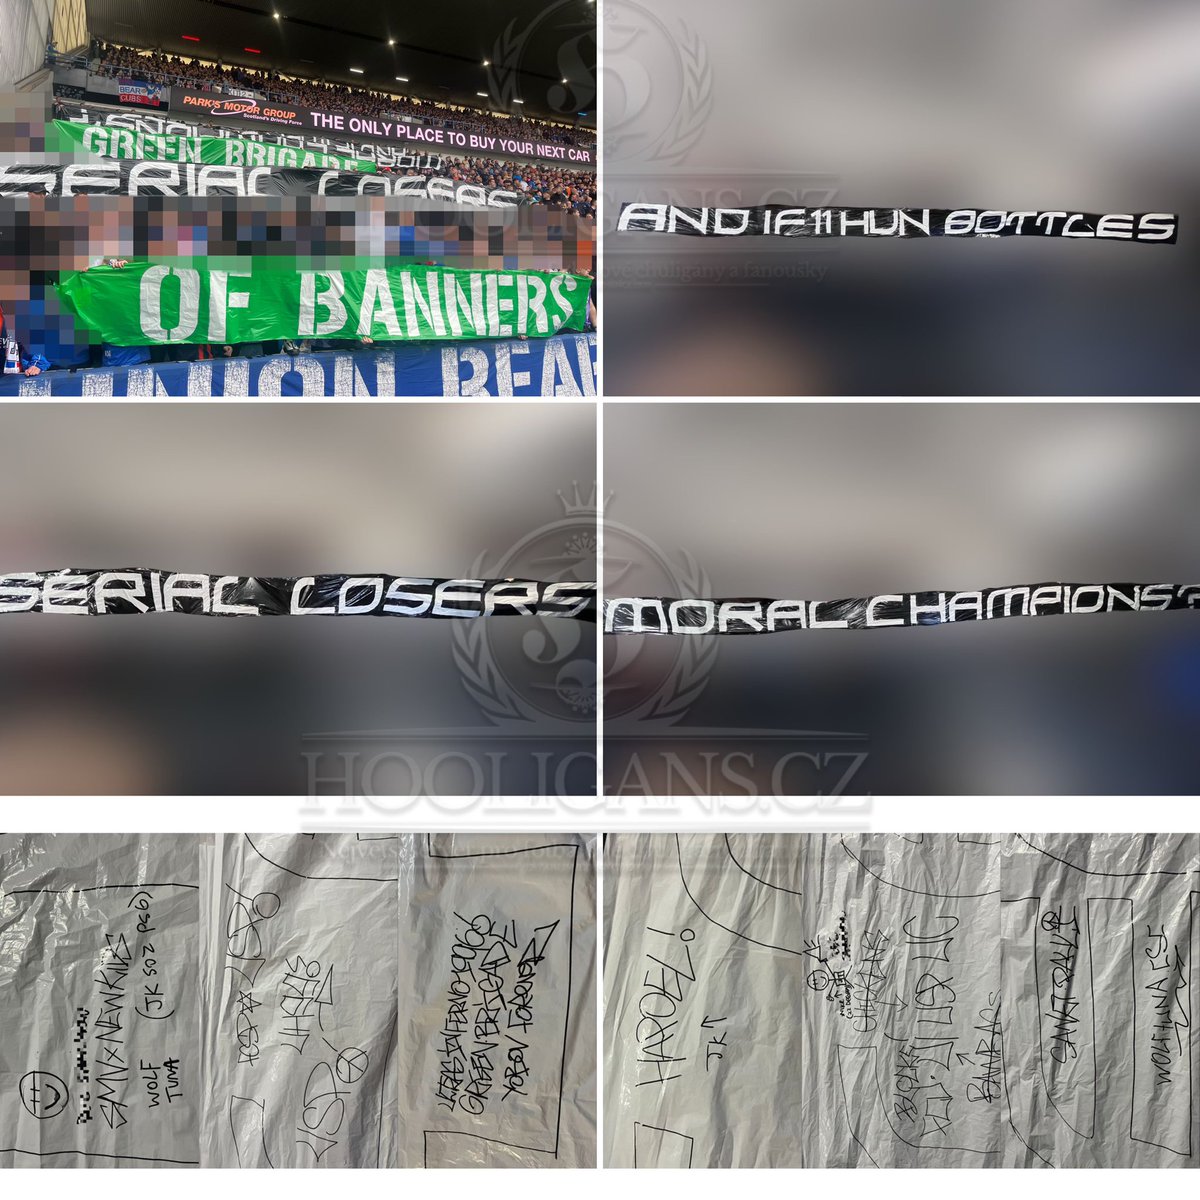 05.05.2024, Union bears (Rangers🏴󠁧󠁢󠁳󠁣󠁴󠁿) steal Green Brigade (Celtic🏴󠁧󠁢󠁳󠁣󠁴󠁿) banners for the derby next week. Green Brigade also had some messages for St Pauli🇩🇪 and the bhoys Celtic capo hooligans.cz